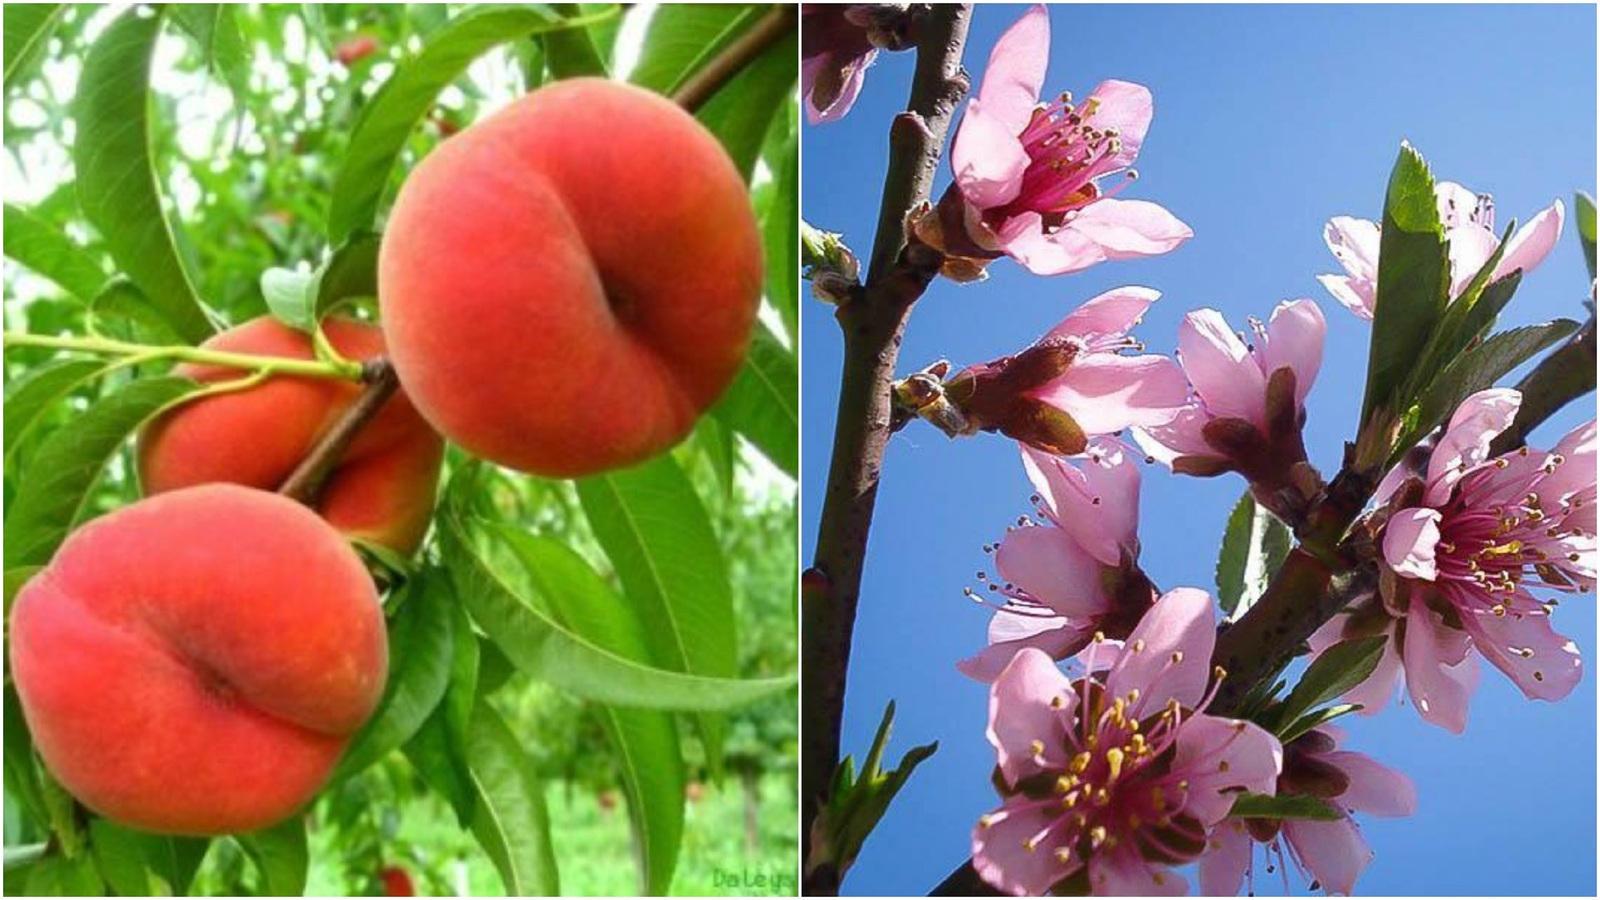 Home Gardening - Saturn Peach Trees Well Rooted New Stock Plant Up To 10 In Tall